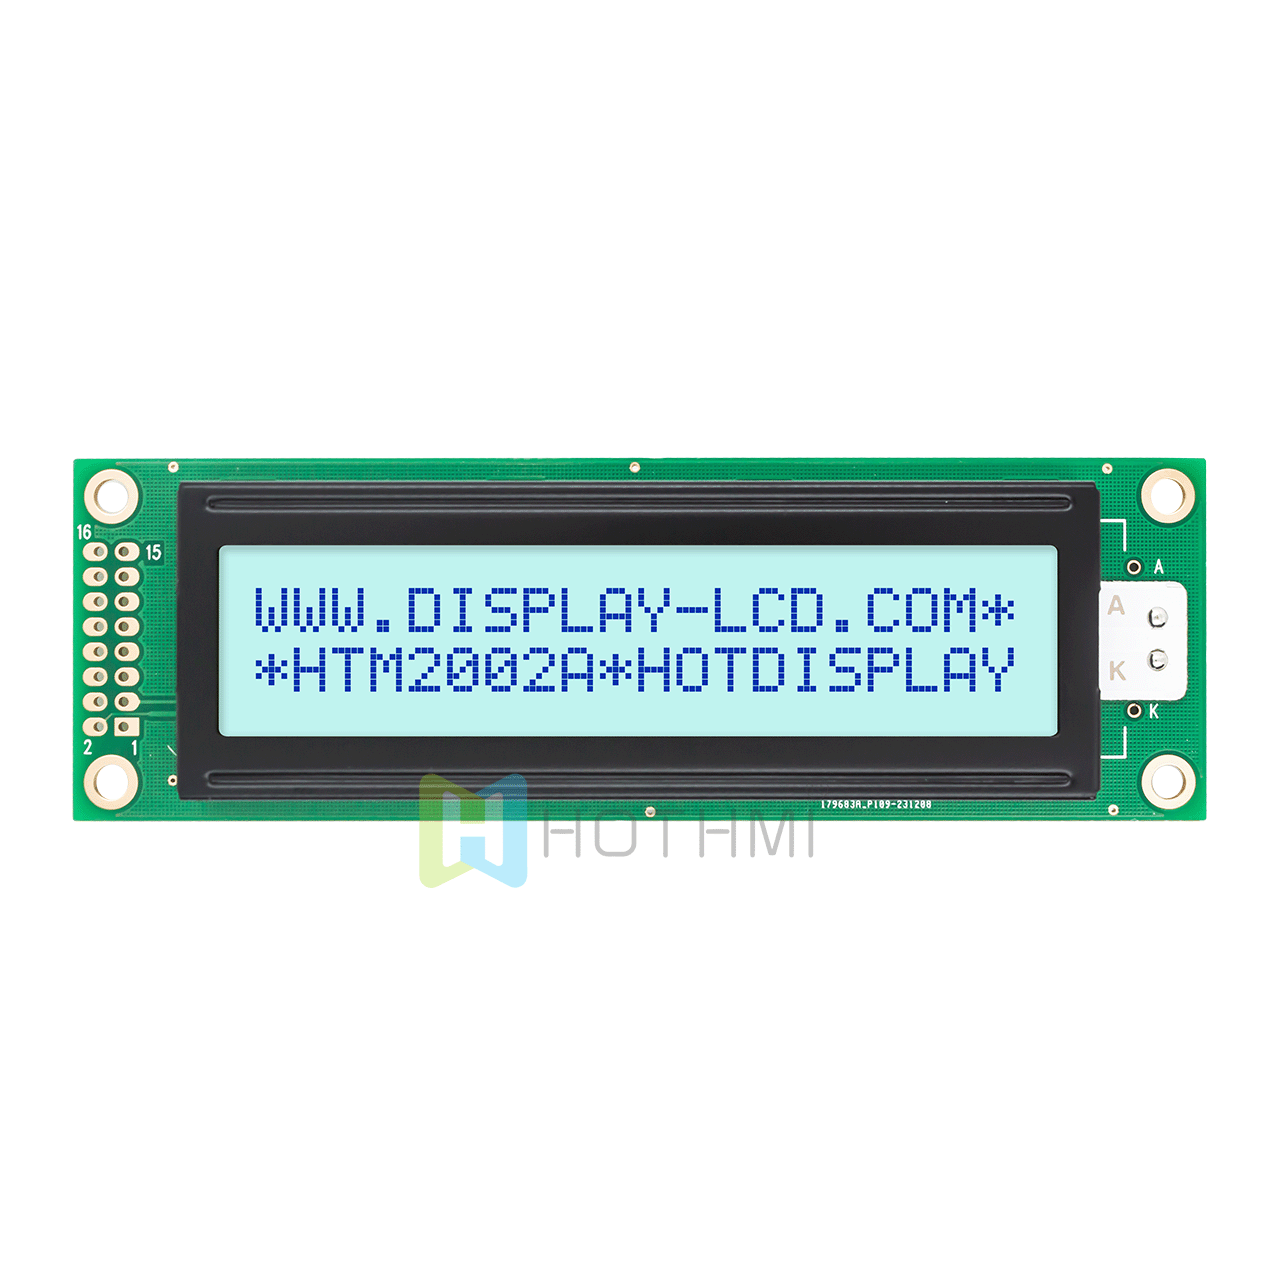 2X20 character monochrome LCD Module | STN+ gray background blue character display | 5.0V | transflective display | ST7066U controller | Adruino